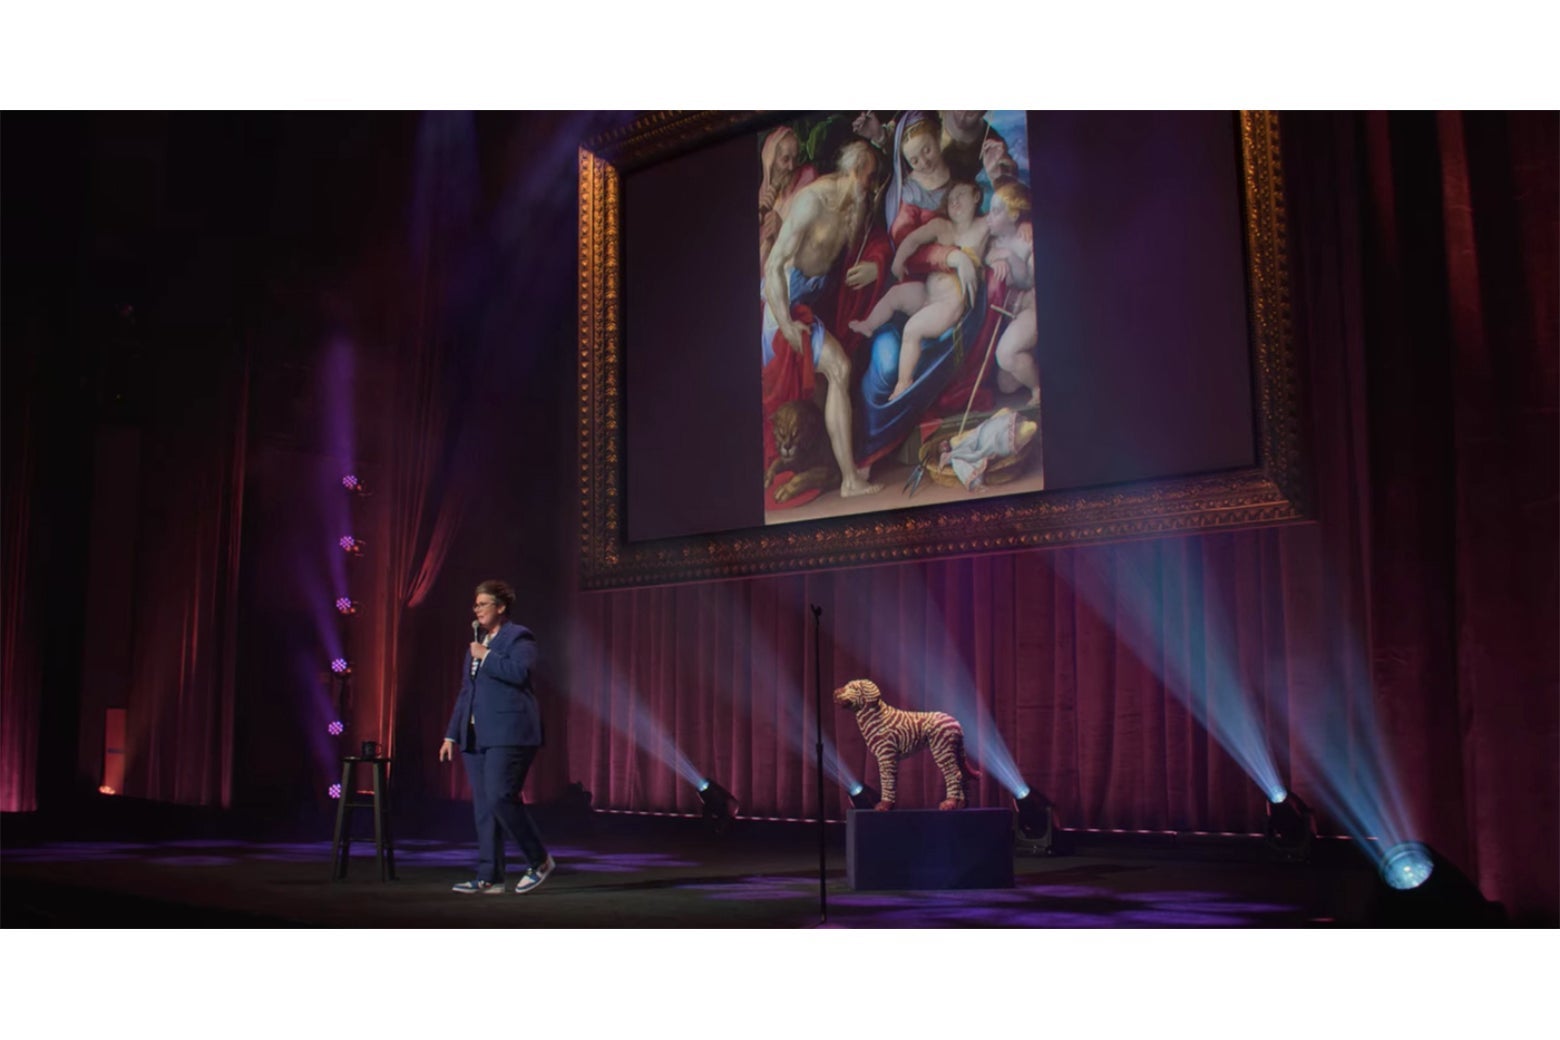 Hannah Gadsby onstage in front of a painting of the Holy Family in which the baby Jesus is gigantic for some reason.